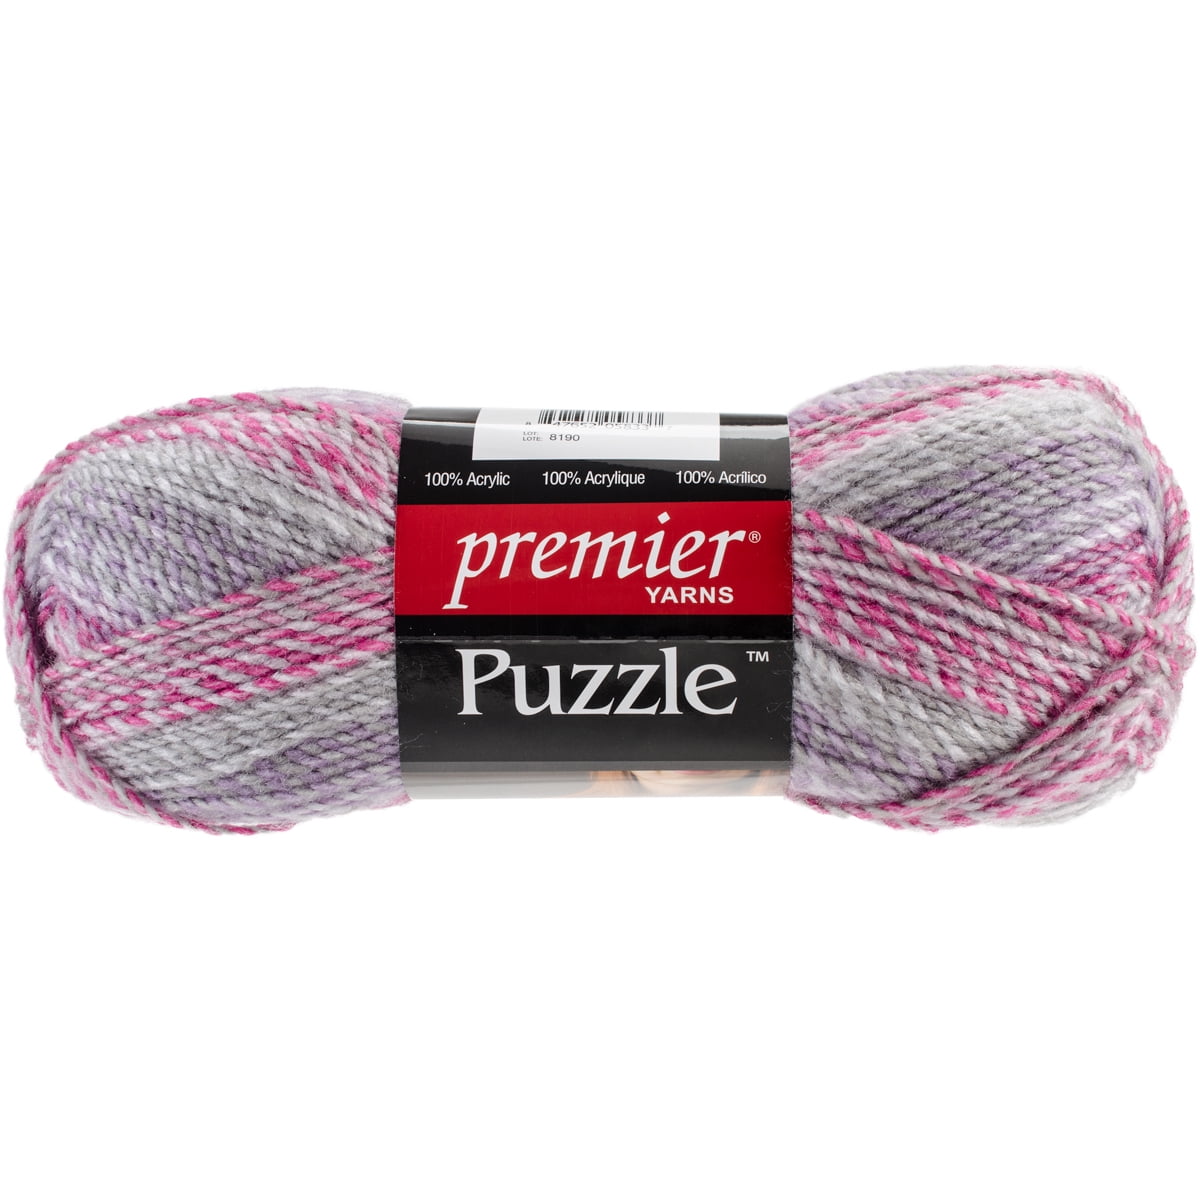 Premier Yarns - New Premier Puzzle Colors have arrived! With this new  addition, we now offer 33 different colors in our Puzzle line. Buy the new  colors here:  . . . #